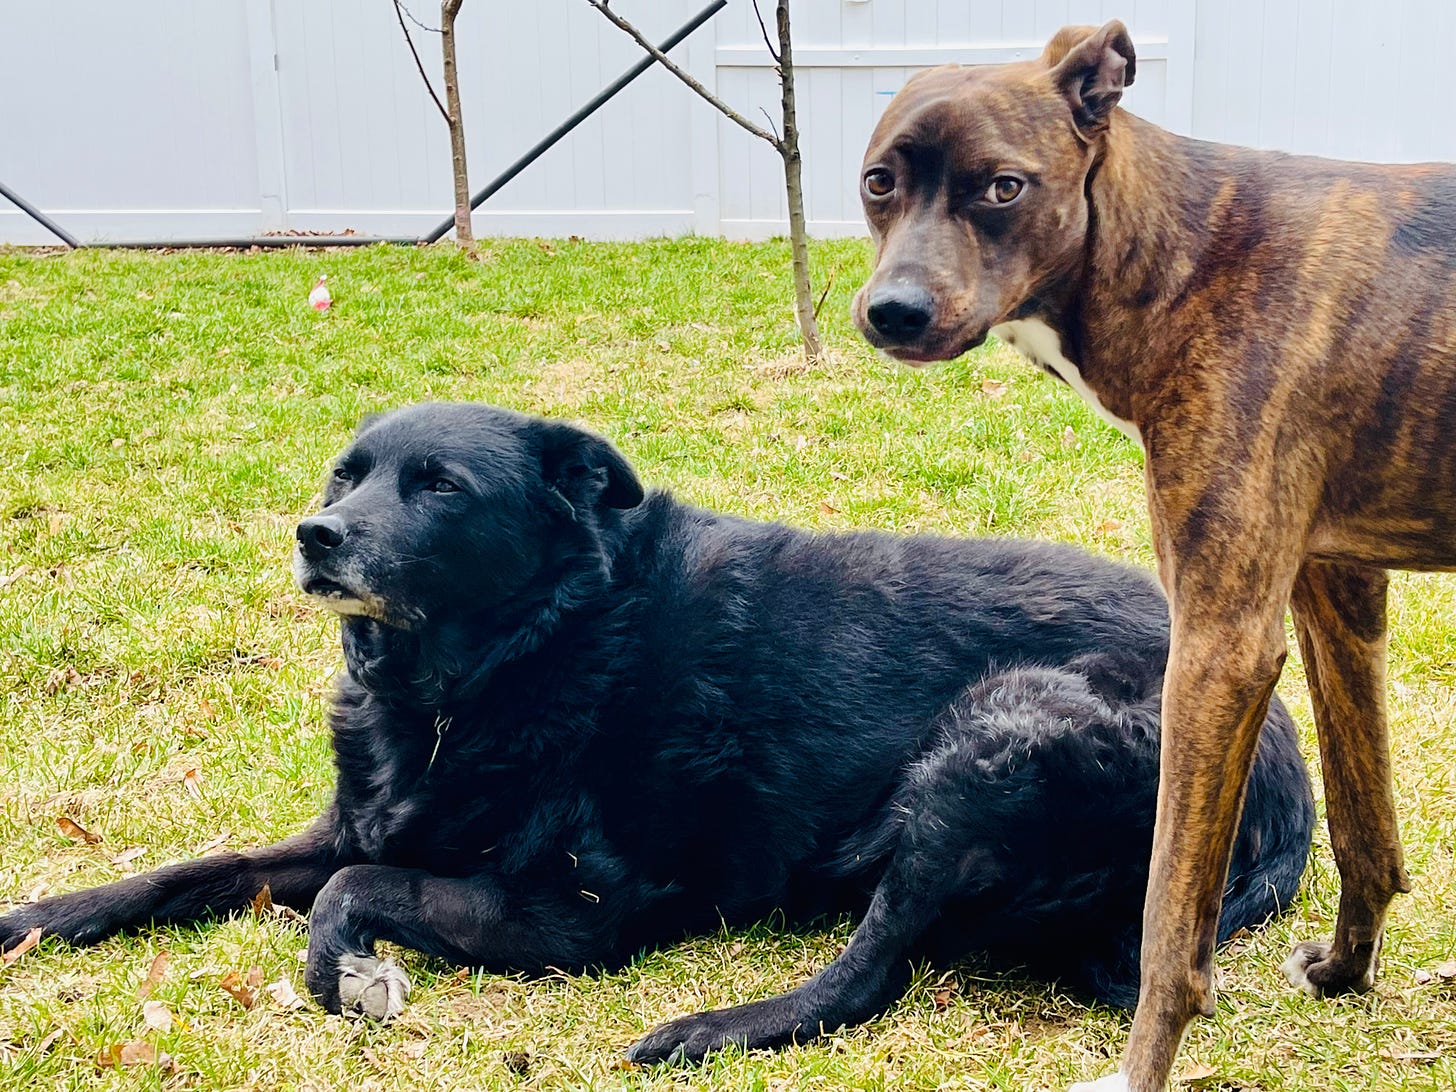 Two dogs in a back yard. One is flopped down sniffing the air. The other is standing and staring at the camera